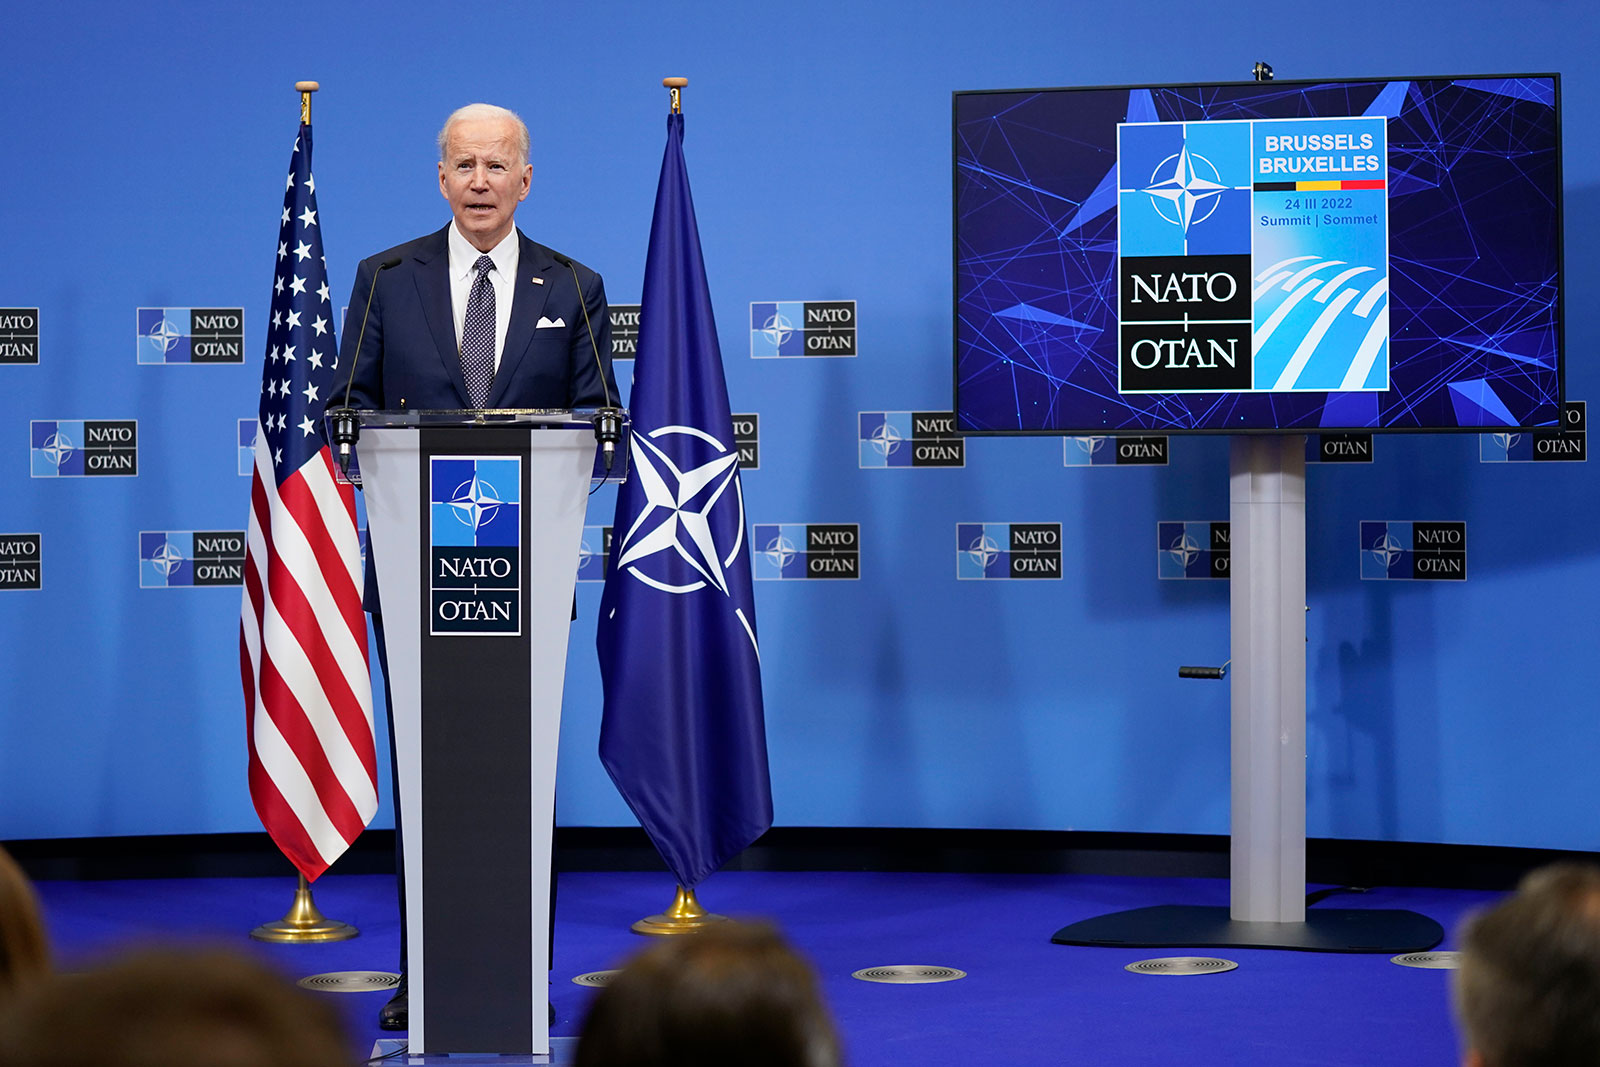 US President Joe Biden speaks about the Russian invasion of Ukraine during a news conference after a NATO summit and Group of Seven meeting at NATO headquarters in Brussels on Thursday.